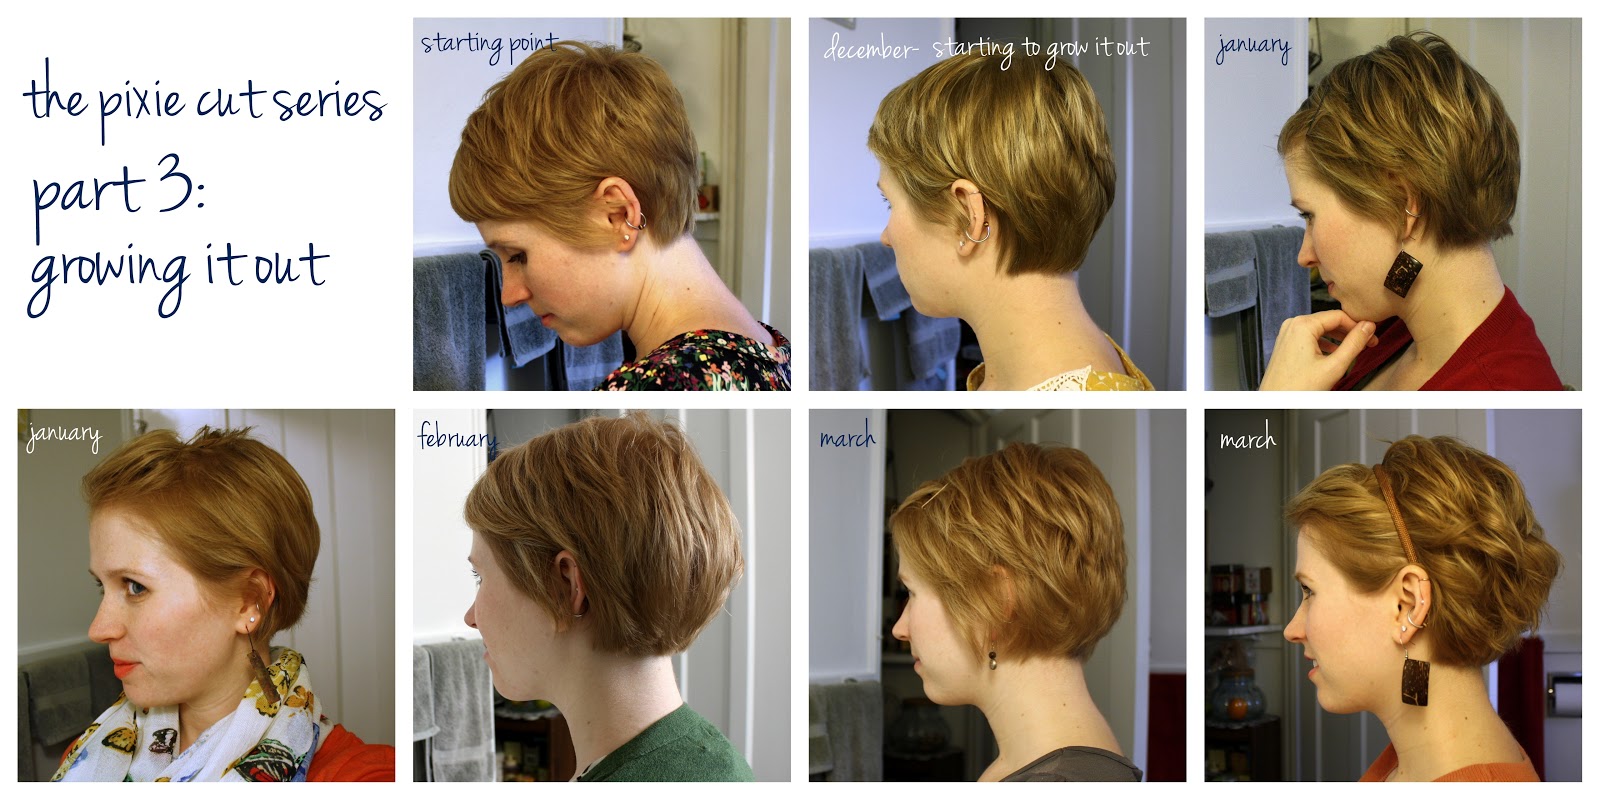 the pixie cut series, part 3: growing it out